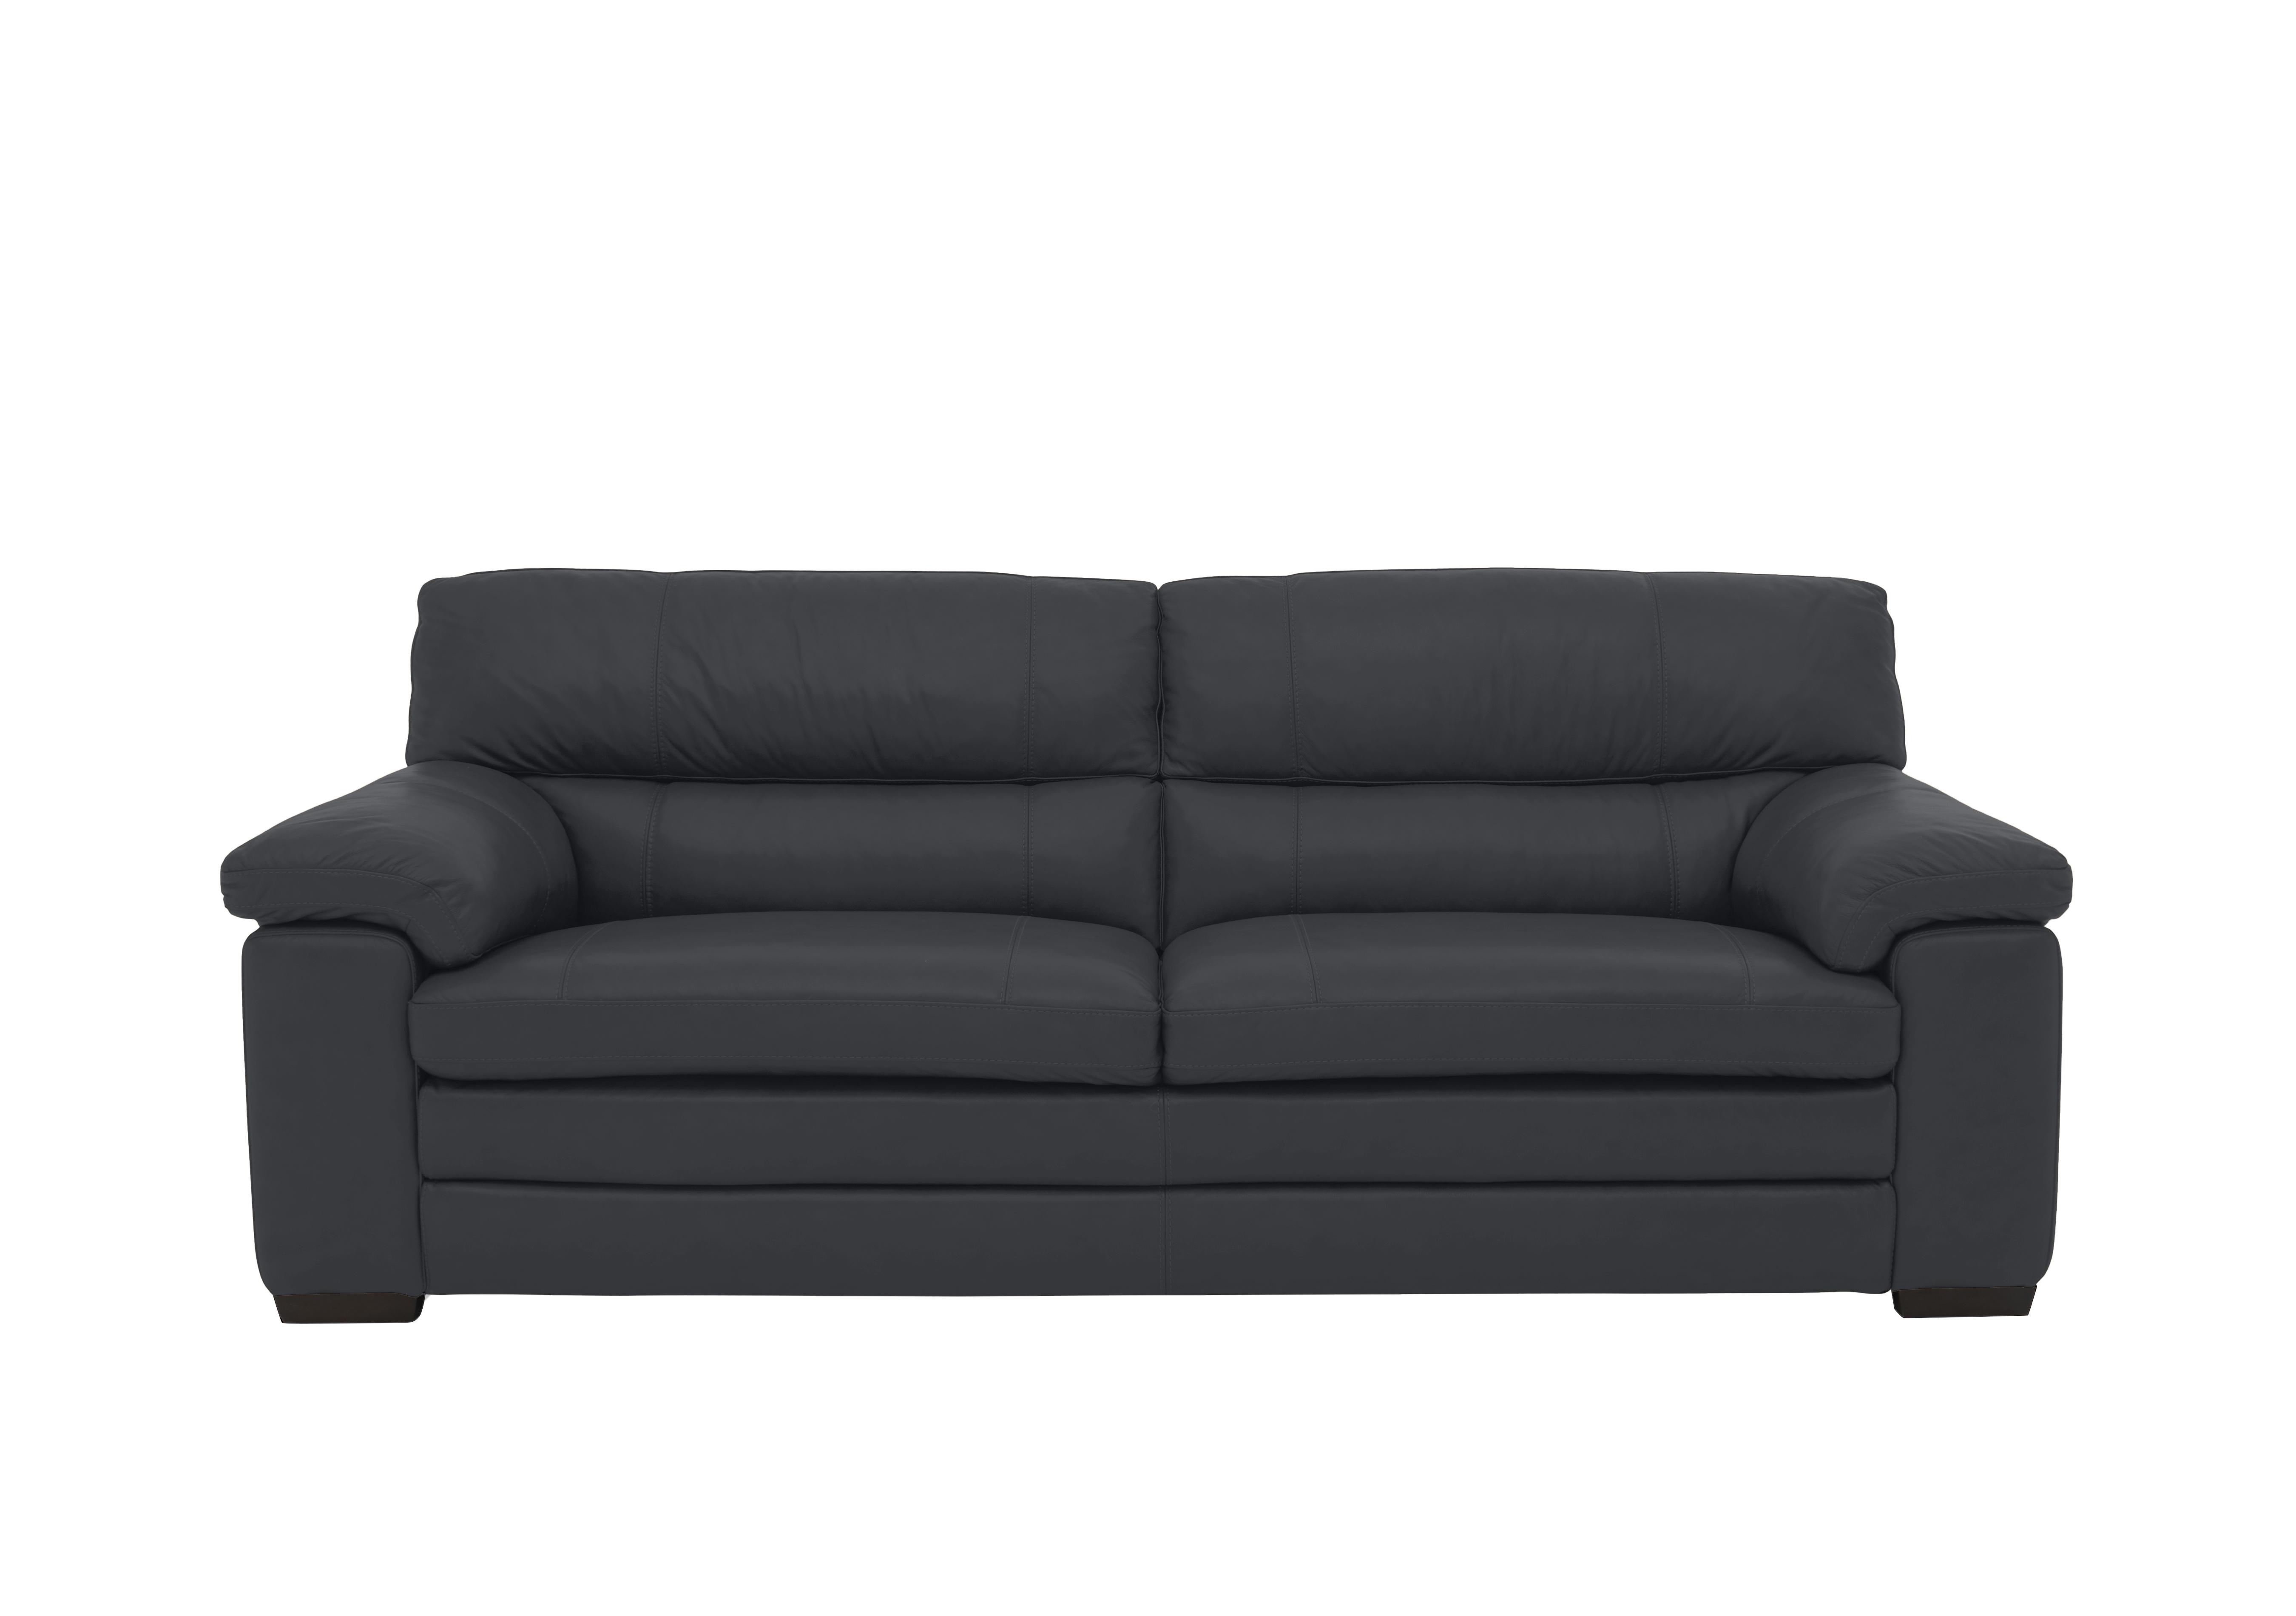 Cozee 3 Seater Pure Premium Leather Sofa in Nw-517e Shale Grey on Furniture Village